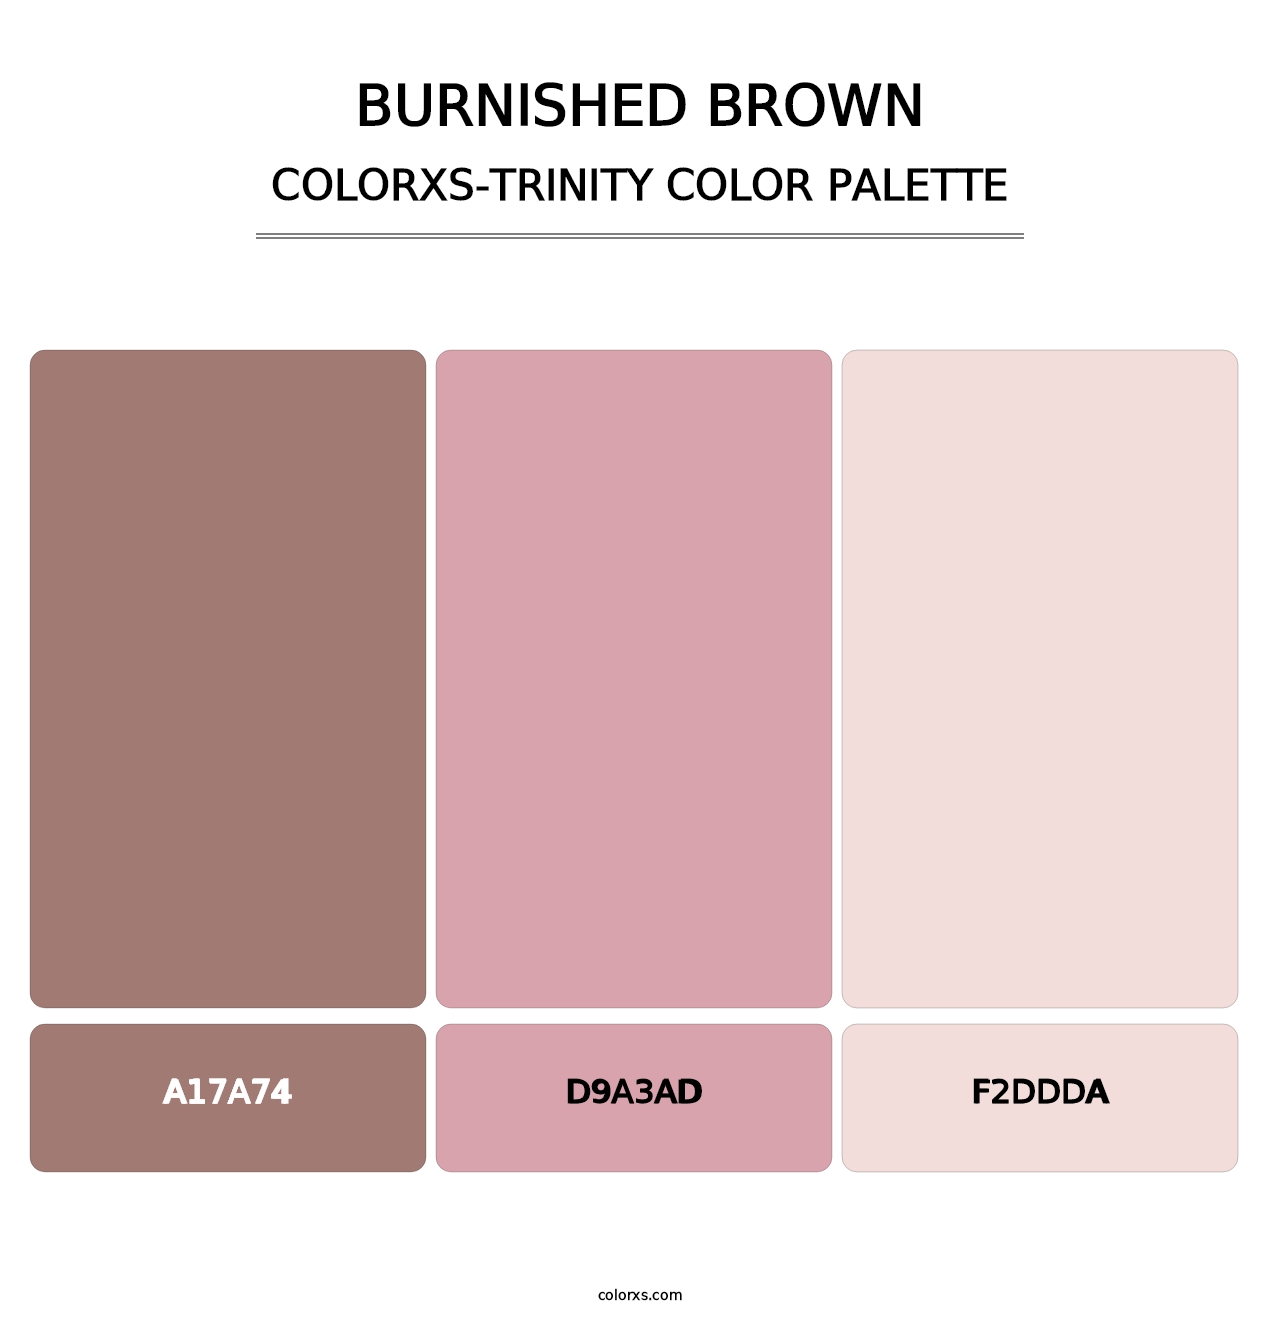 Burnished Brown - Colorxs Trinity Palette